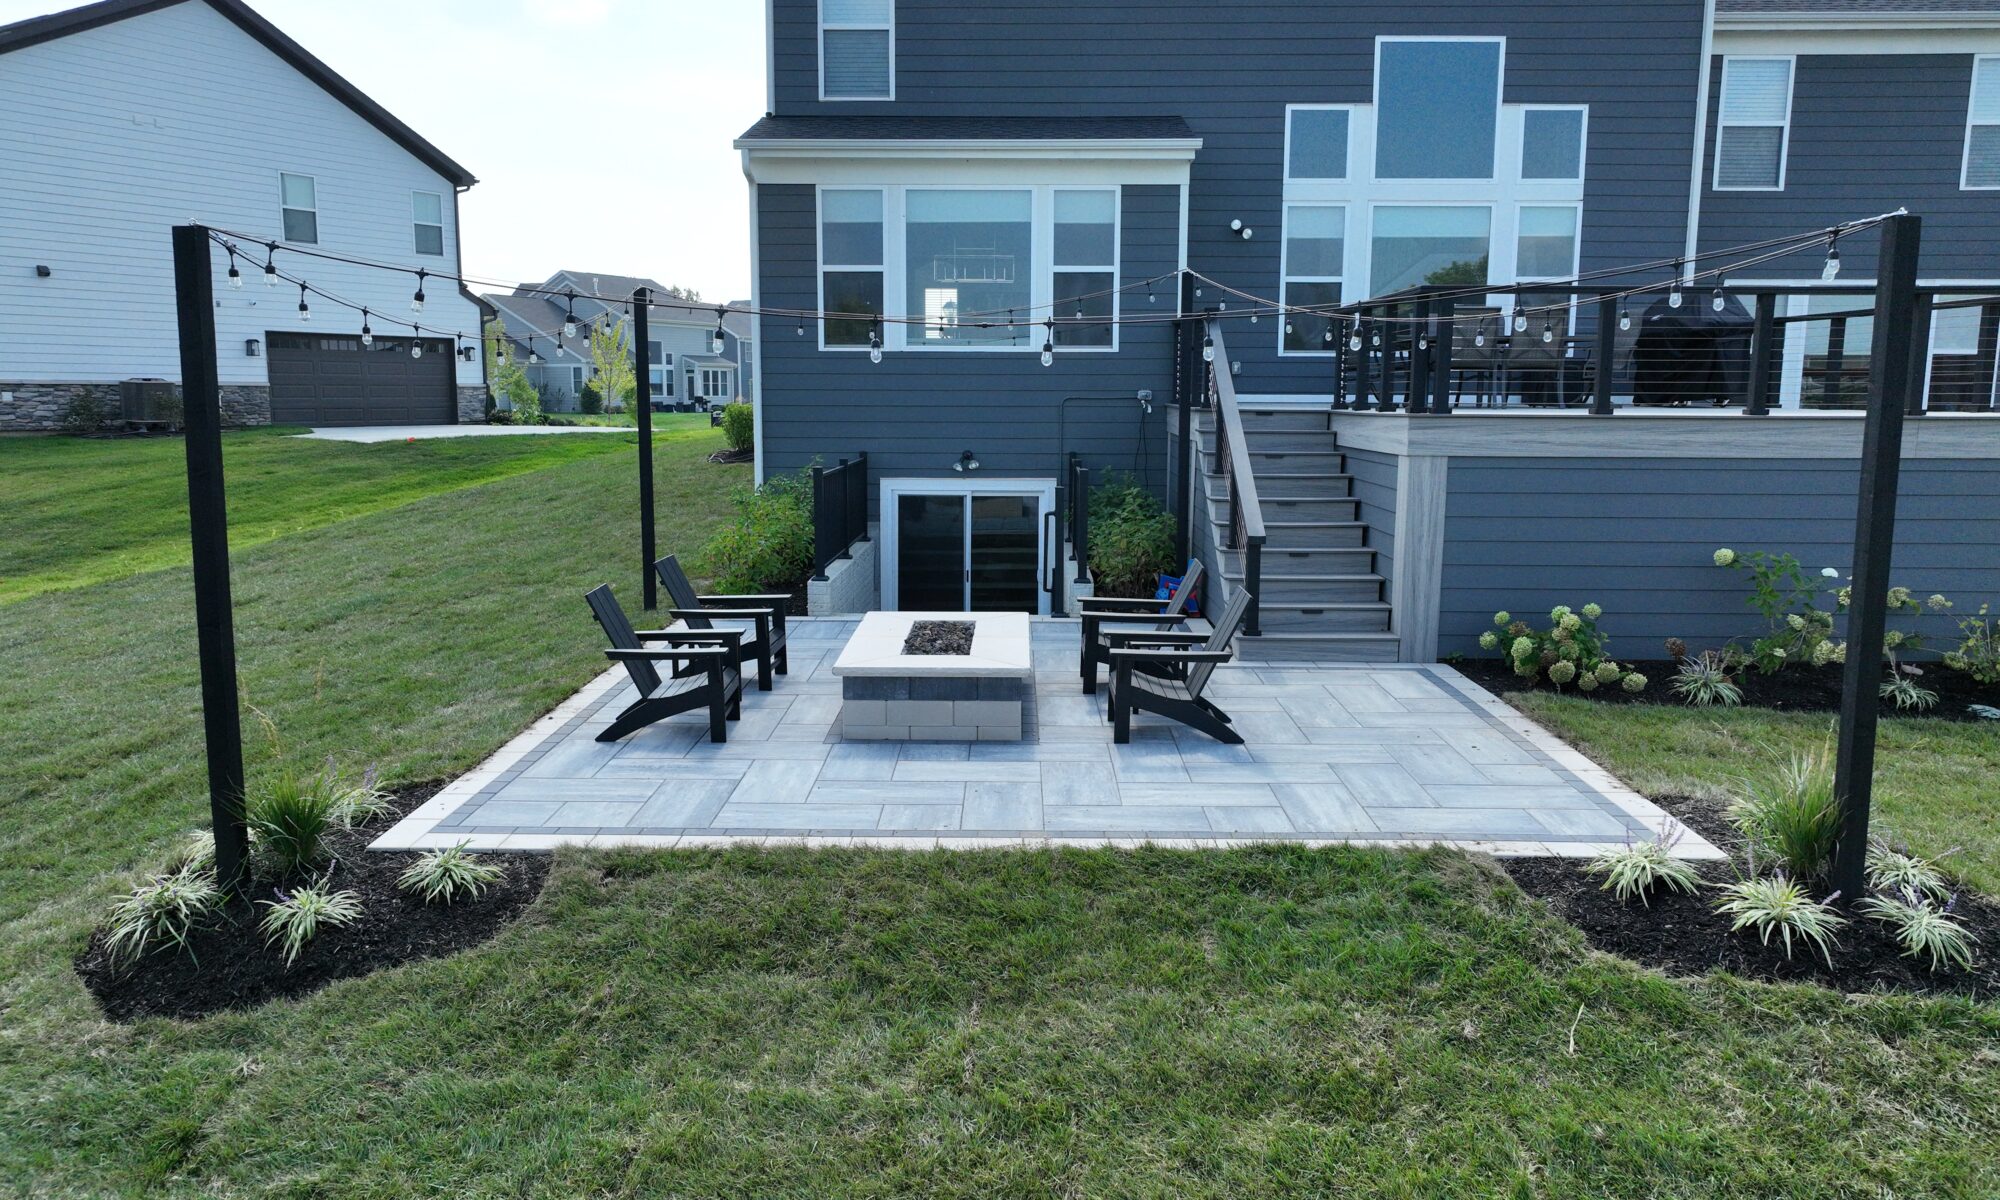 Chatham Elevated Deck Precision Outdoors Deckorators Decking Westfield Indiana Custom Cable railing composition deck string lighting gas firepit fire pit walk out basement custom landscaping paver patio beautiful backyard entertaining space relaxing space